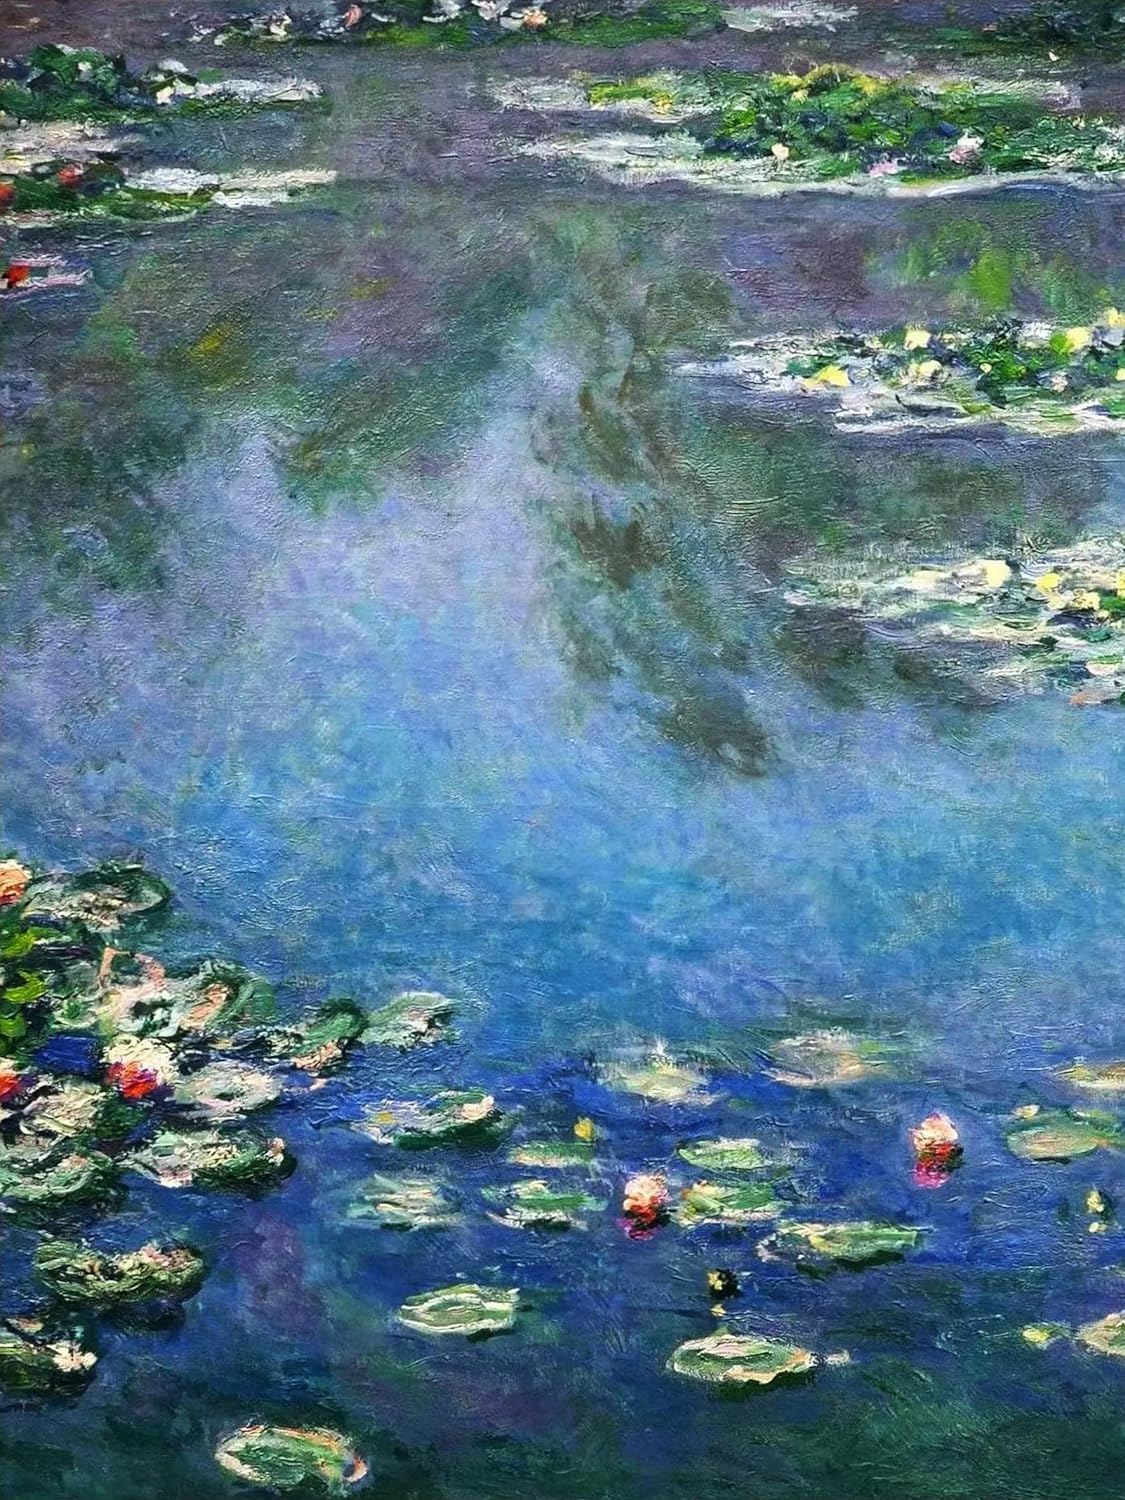 jenesaisquoi Canvas Wall Art Famous Oil Paintings, Water Lilies Claude Monet Art Prints, Claude Monet Artwork Famous Art Posters Ready To Hang for Living Room, Bedroom, Office (Unframed, 12 x 16)